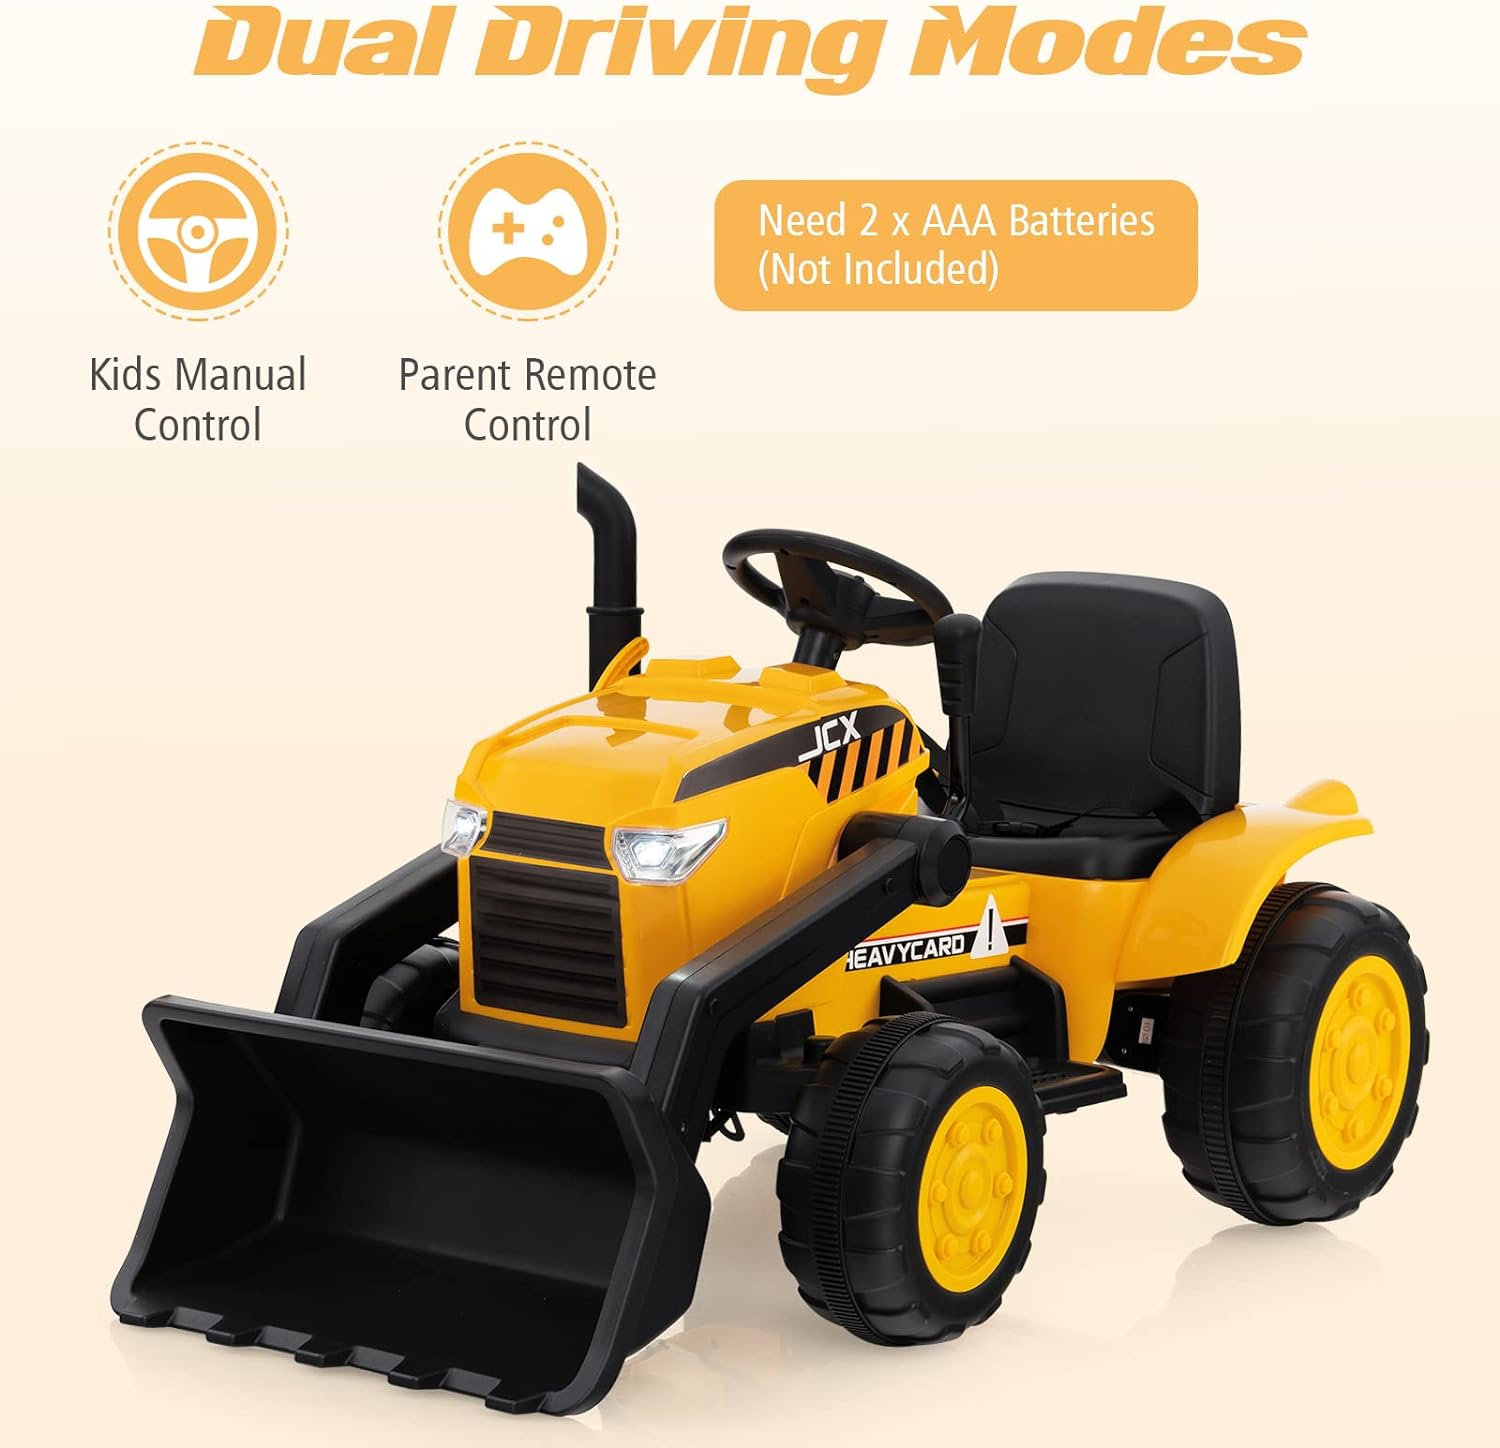 OLAKIDS Kids Ride on Car: A Fun and Exciting Ride-On Excavator for Kids